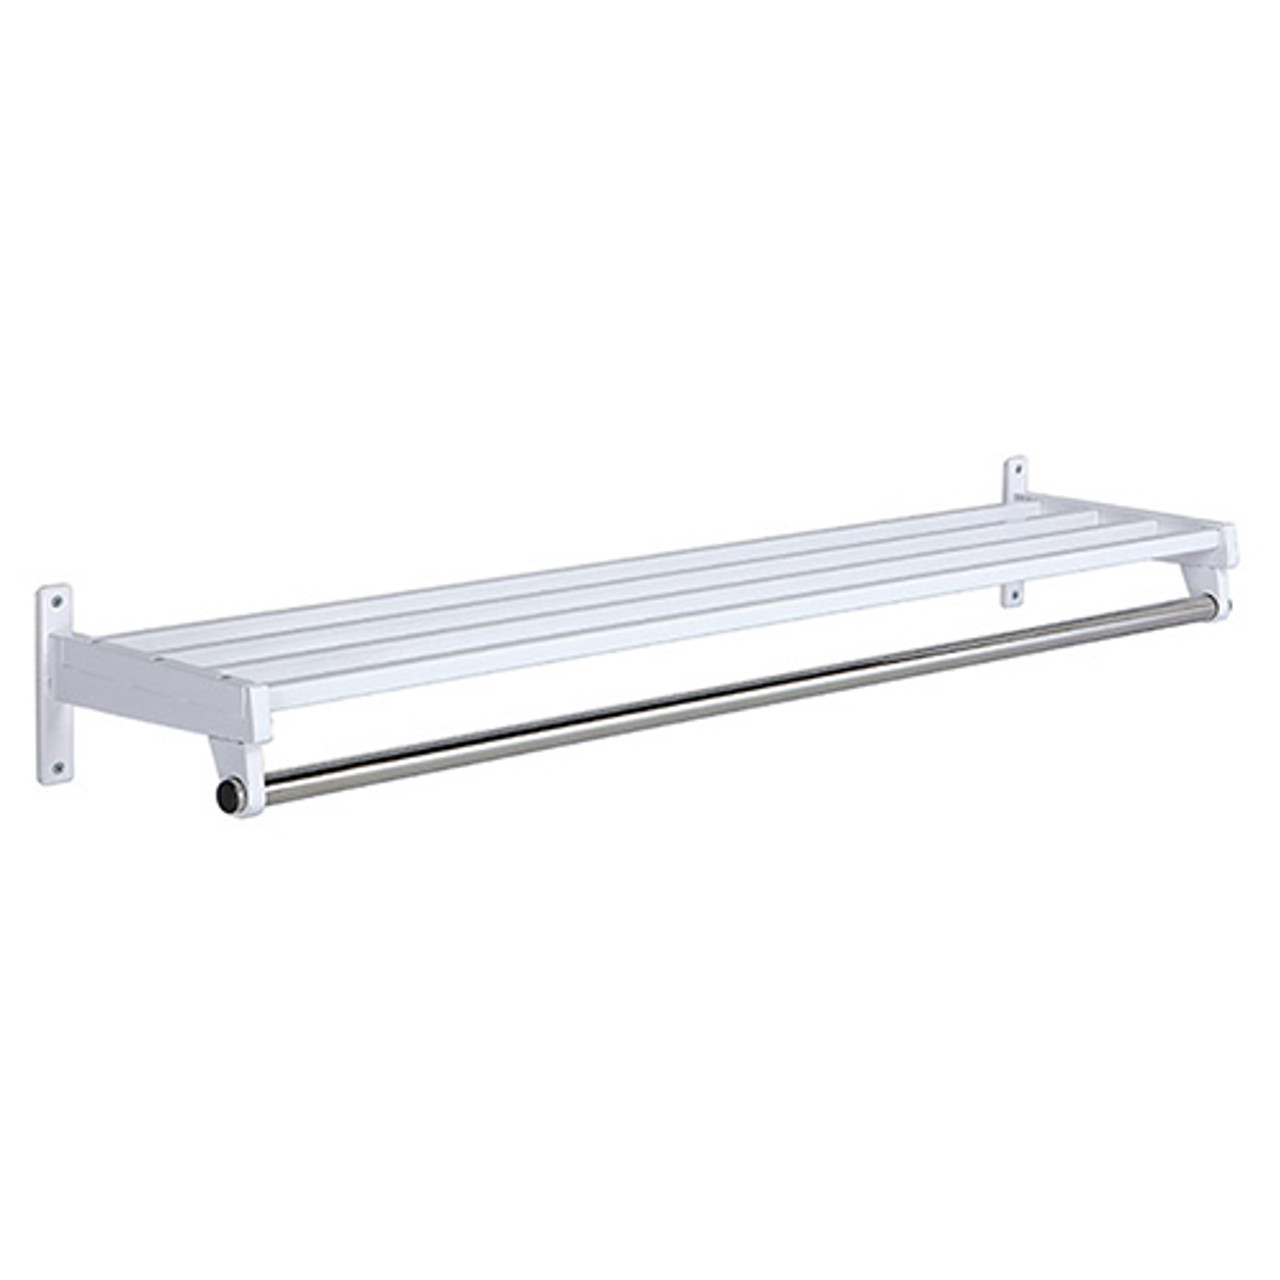 Magnuson 60 Wall Mounted Steel Coat Rack with Shelf - DS-5H